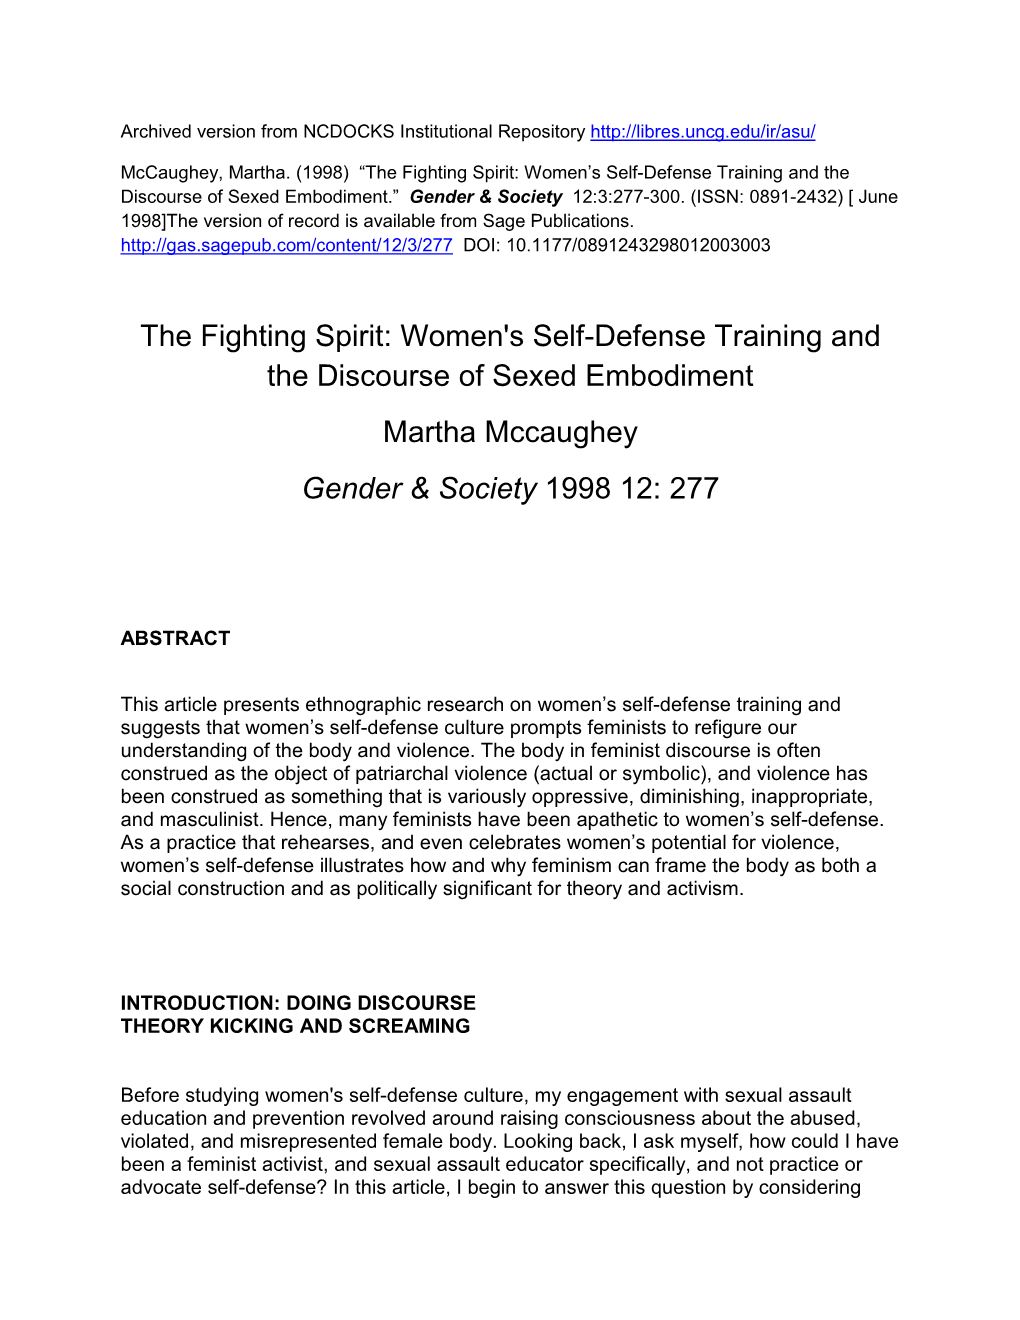 The Fighting Spirit: Women’S Self-Defense Training and the Discourse of Sexed Embodiment.” Gender & Society 12:3:277-300